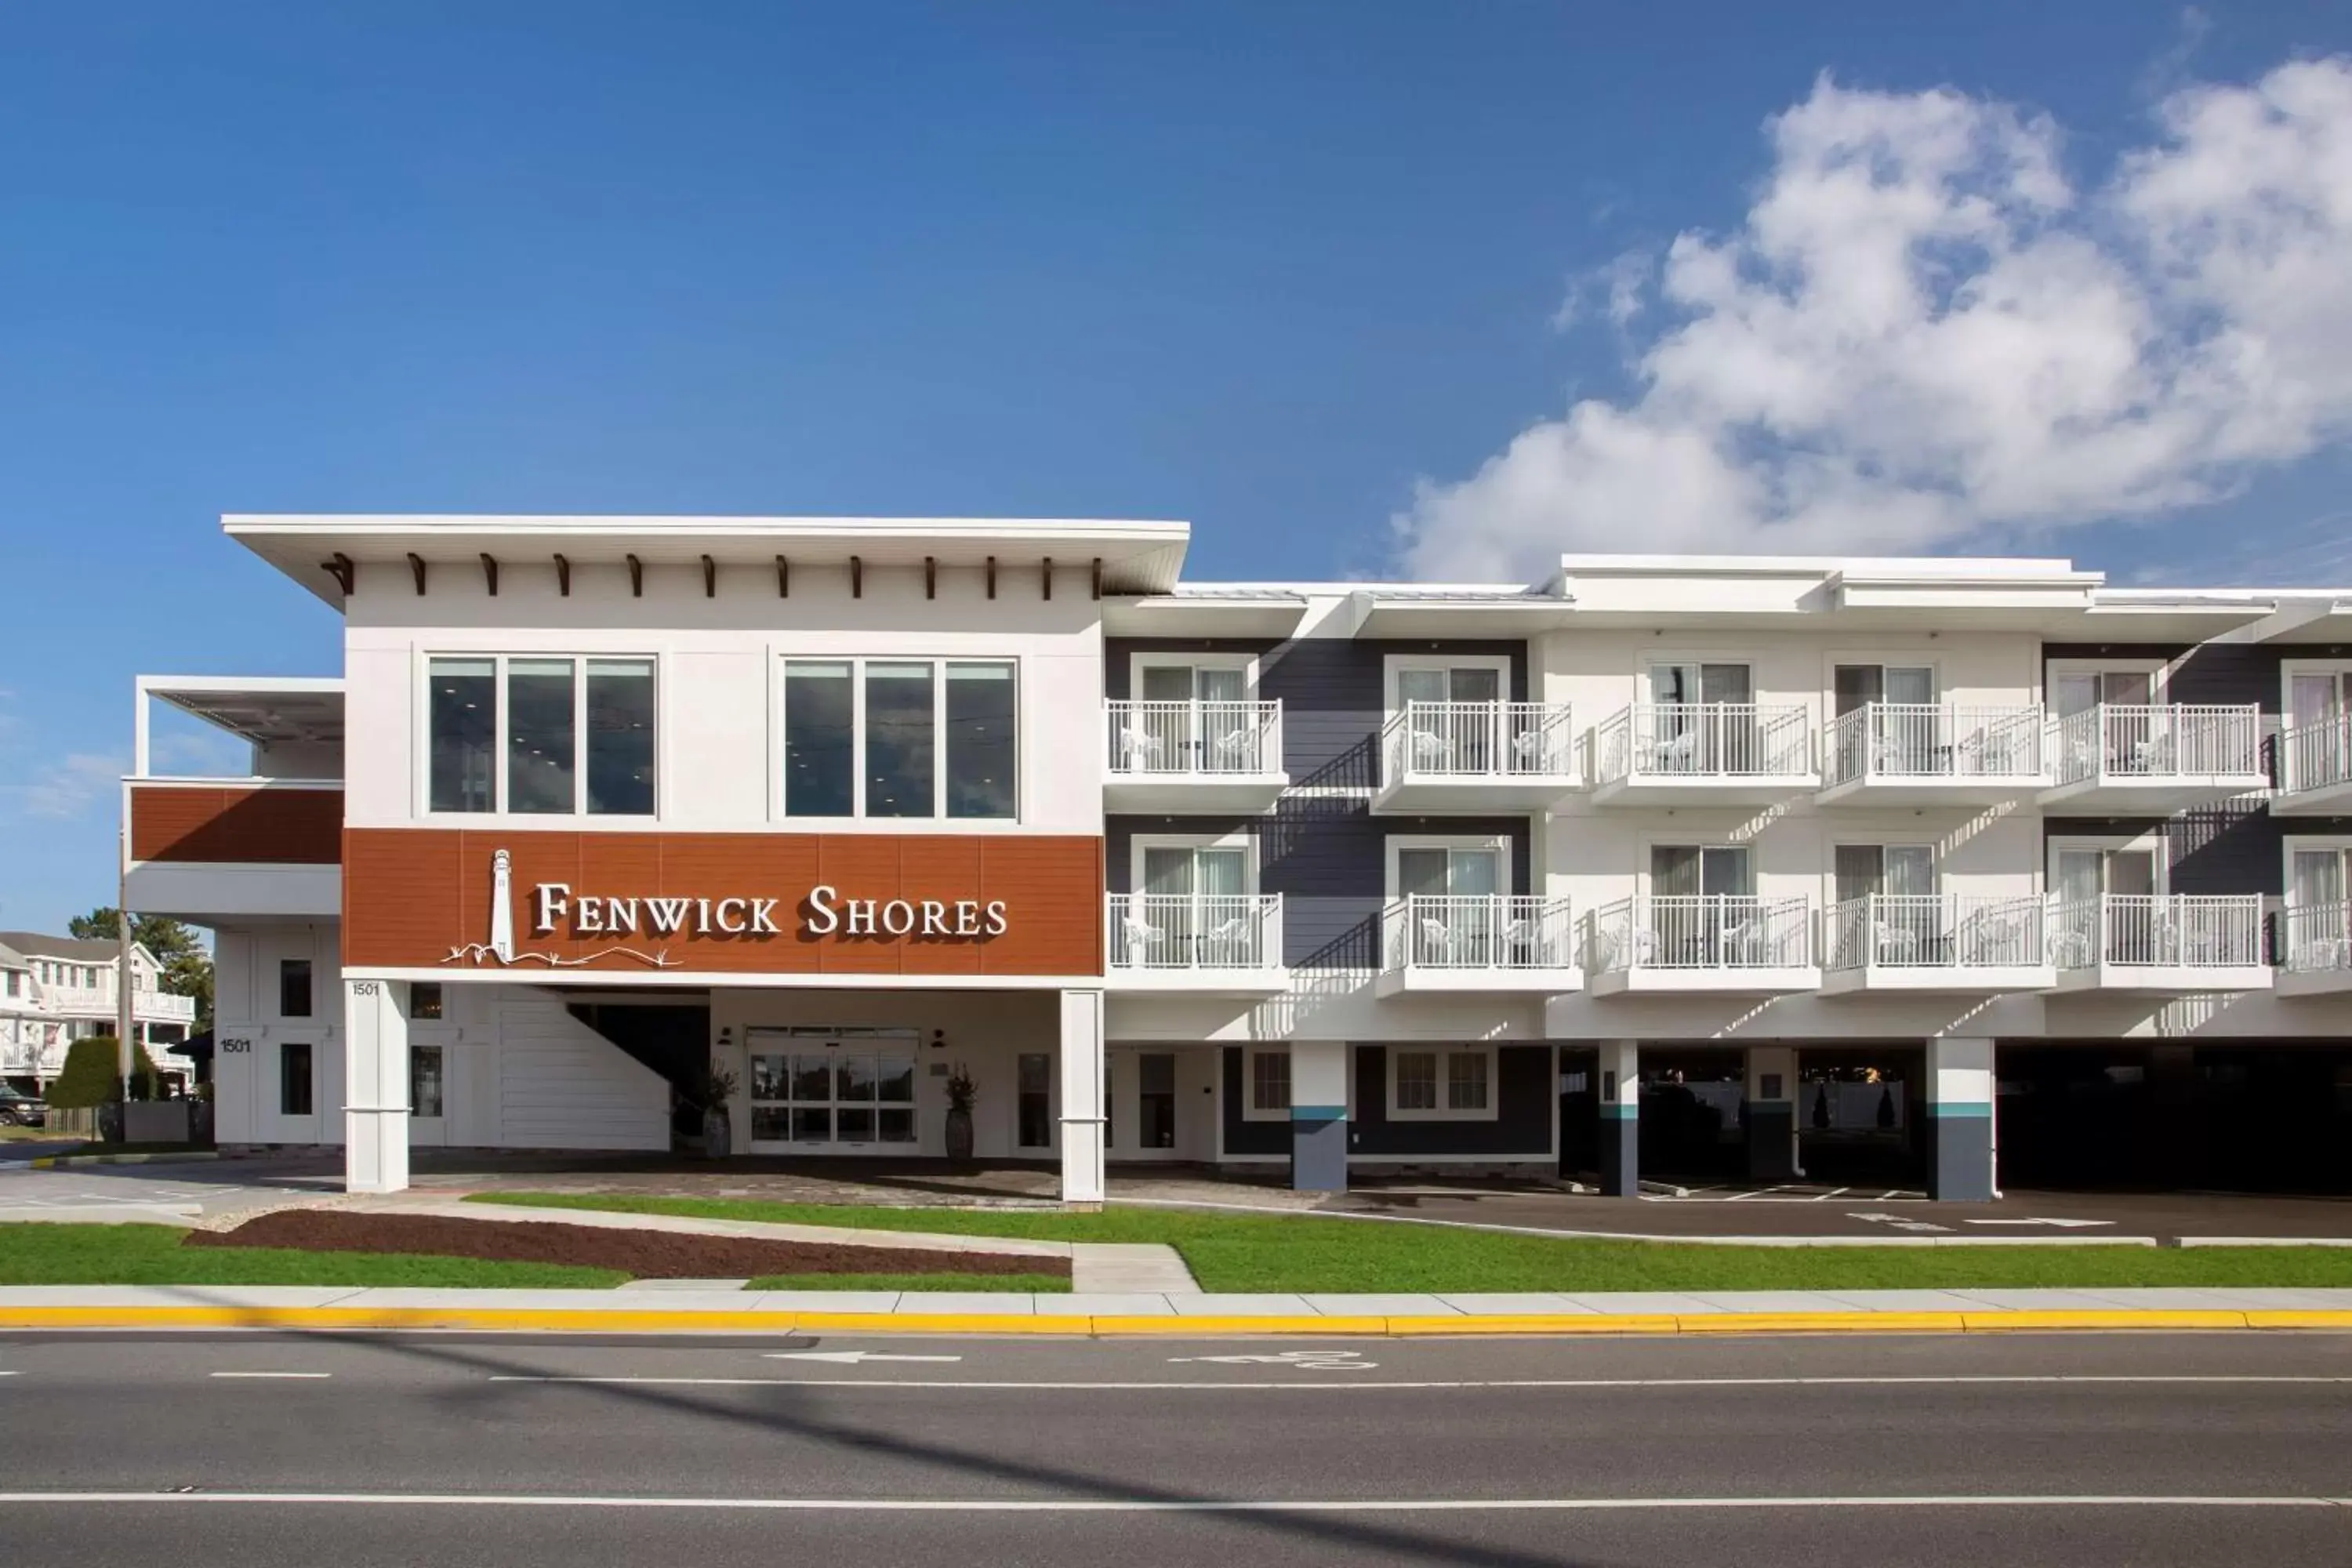 Property Building in Fenwick Shores, Tapestry Collection by Hilton